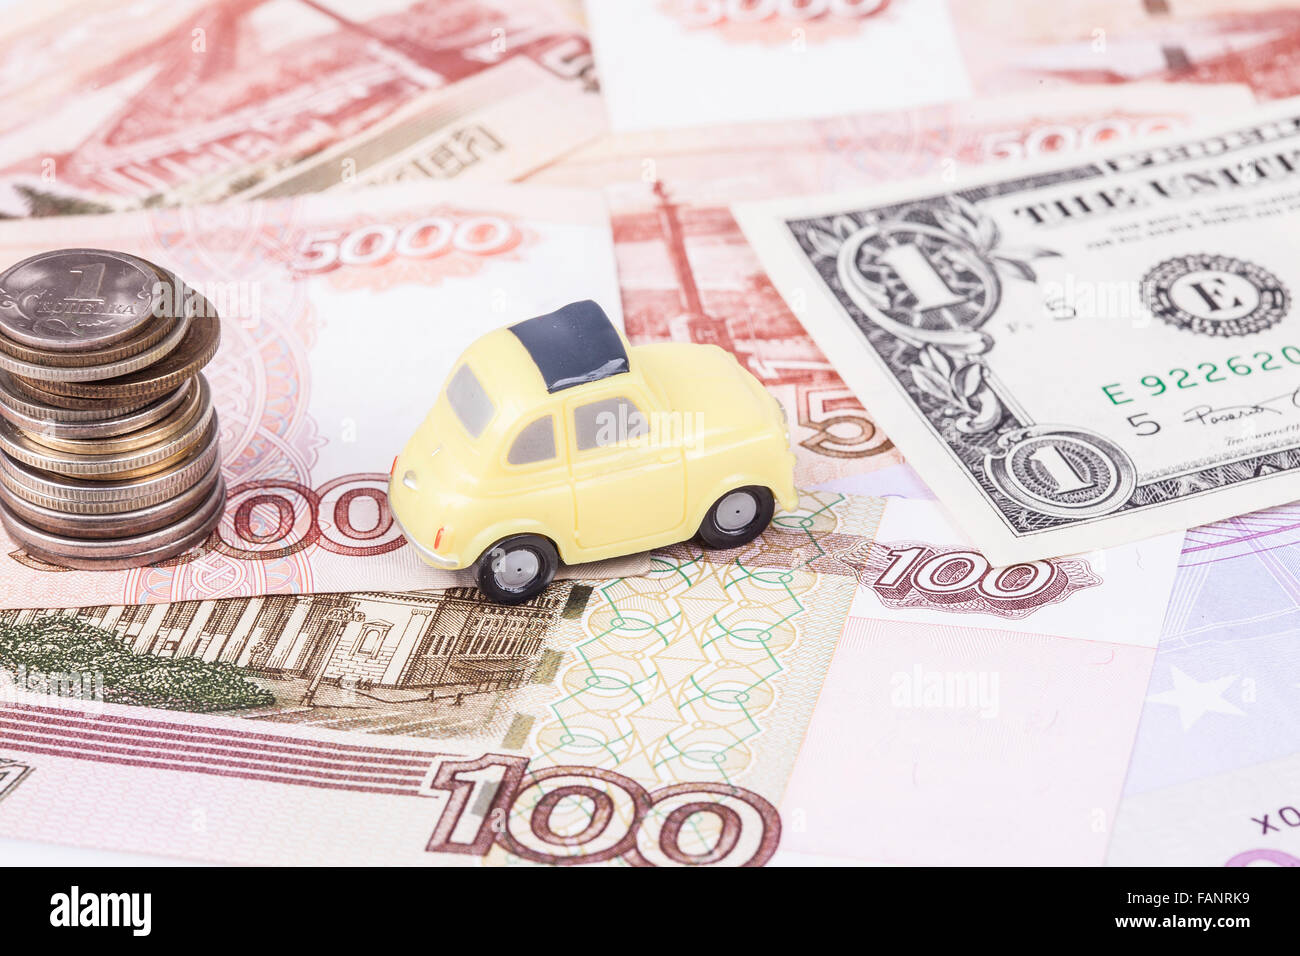 toy car and money: dollars, rubles closeup Stock Photo